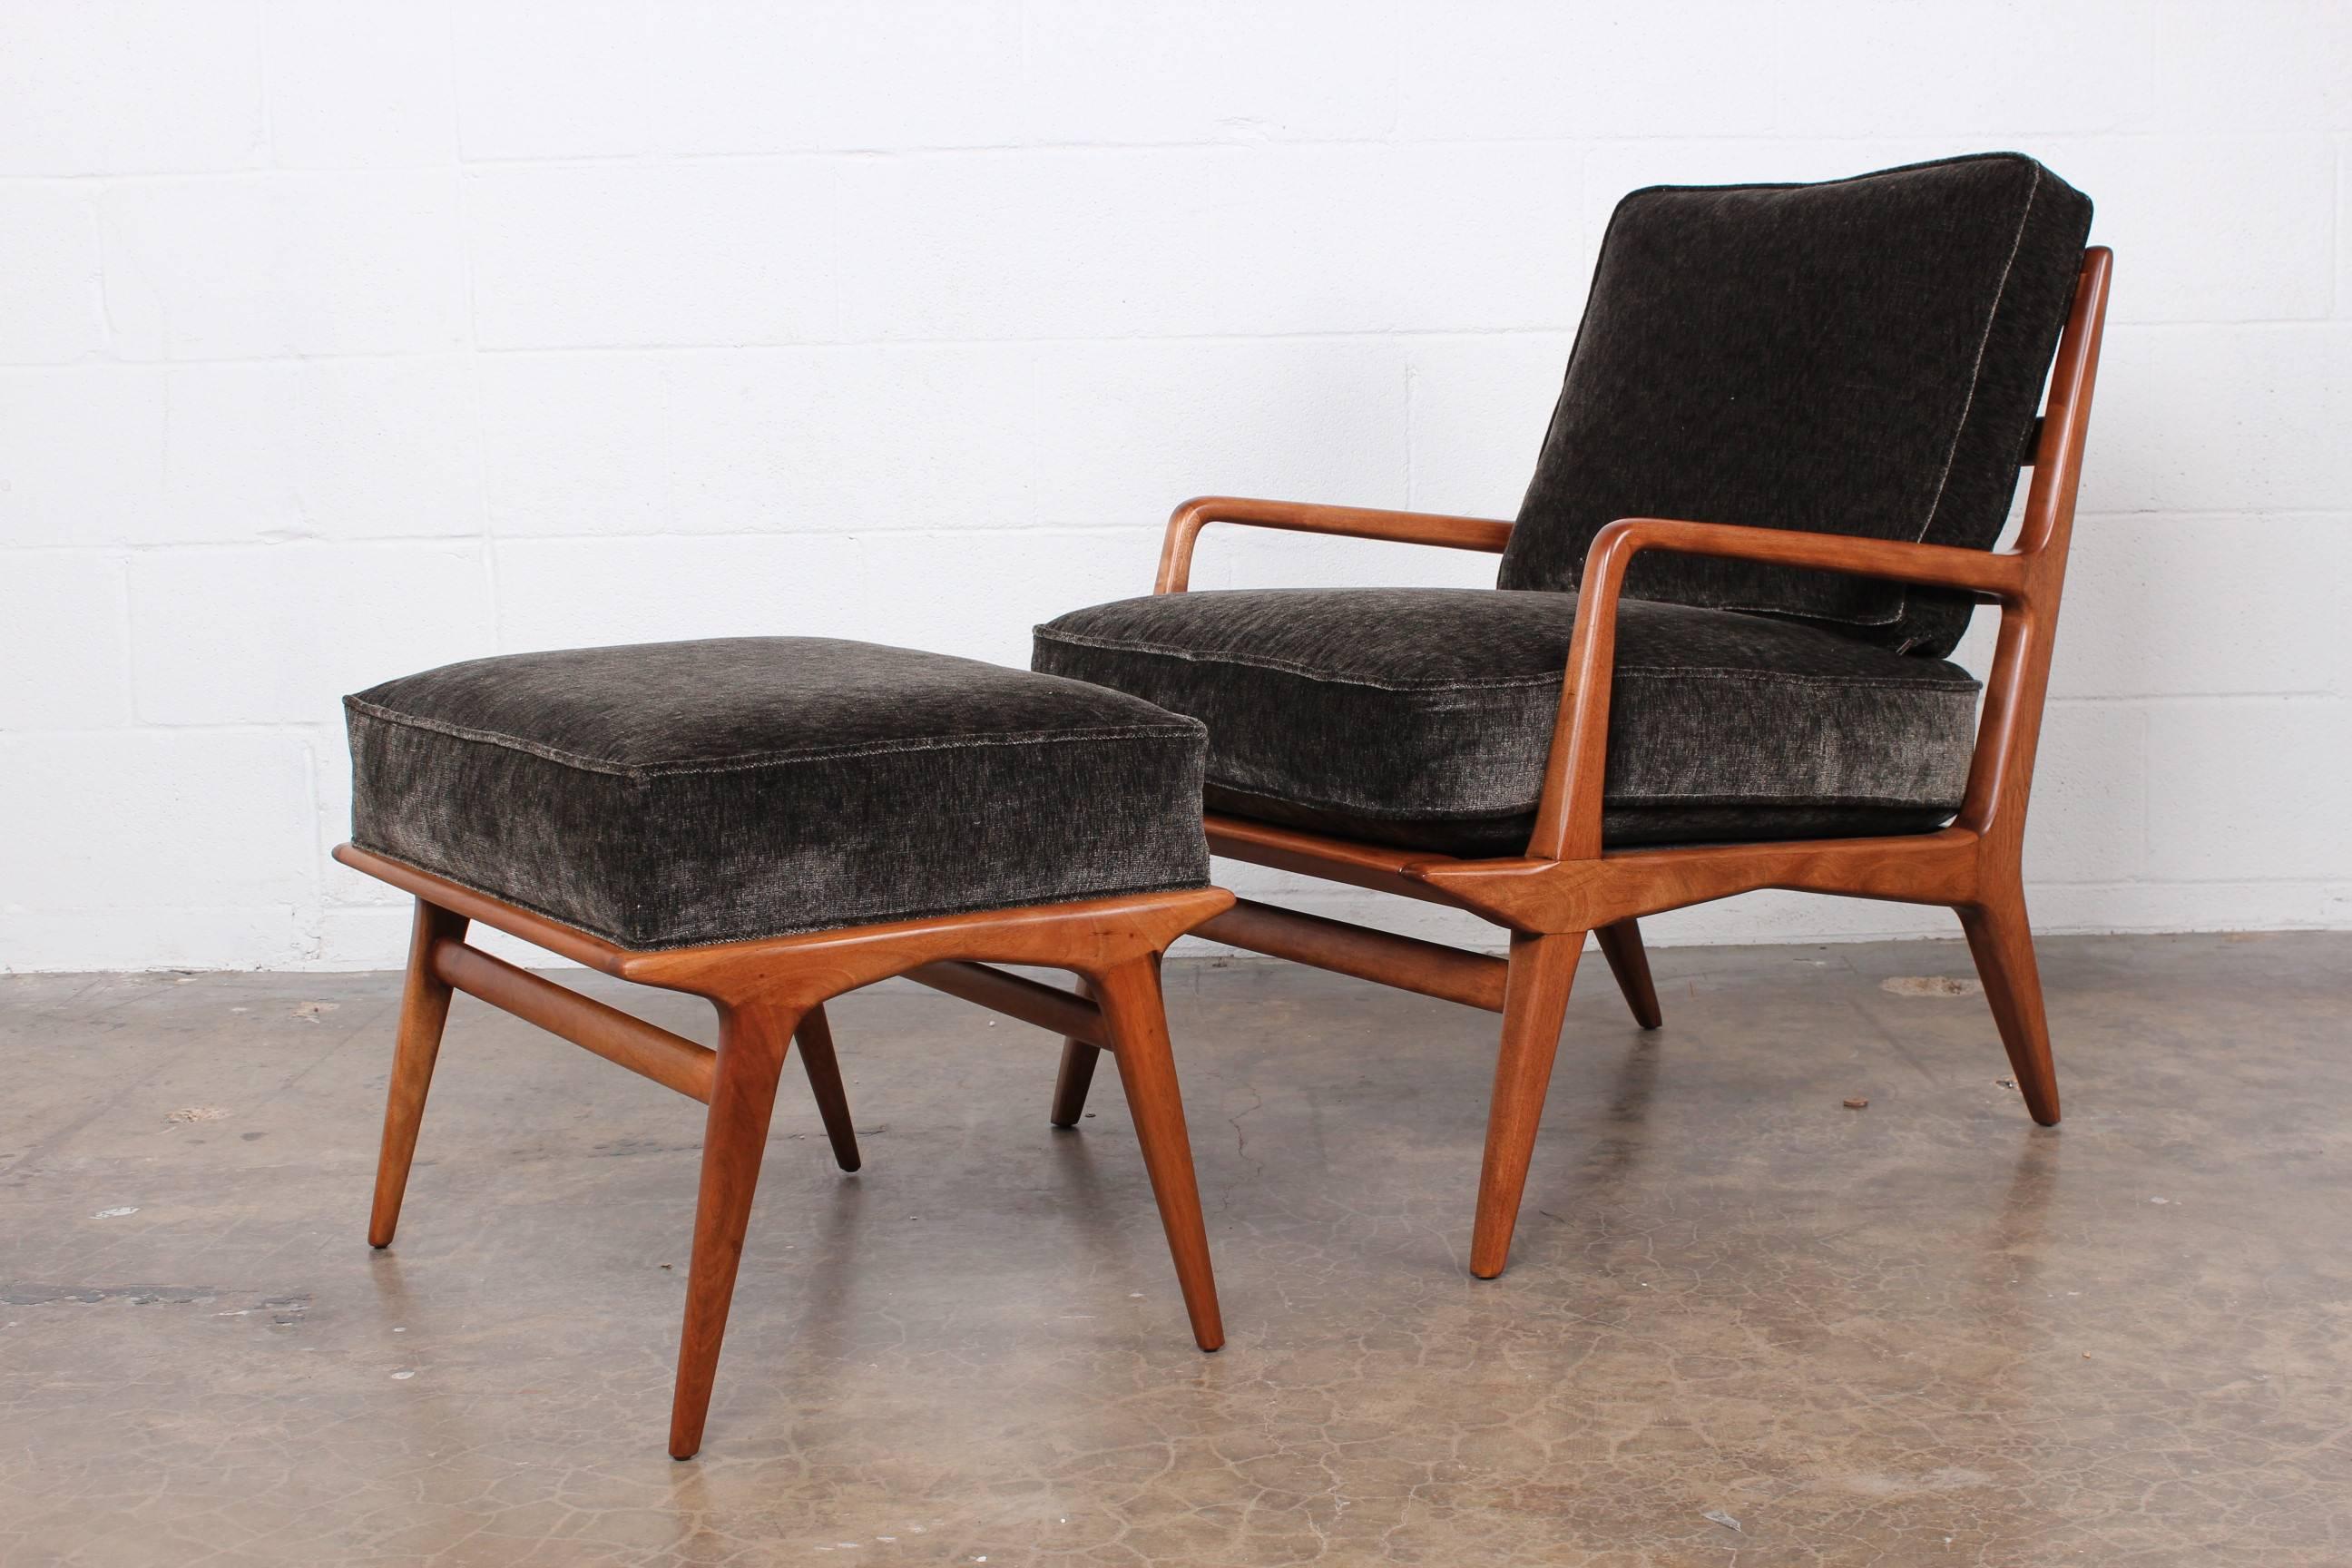 A lounge chair and ottoman designed by Carlo de Carli for Singer & Sons.